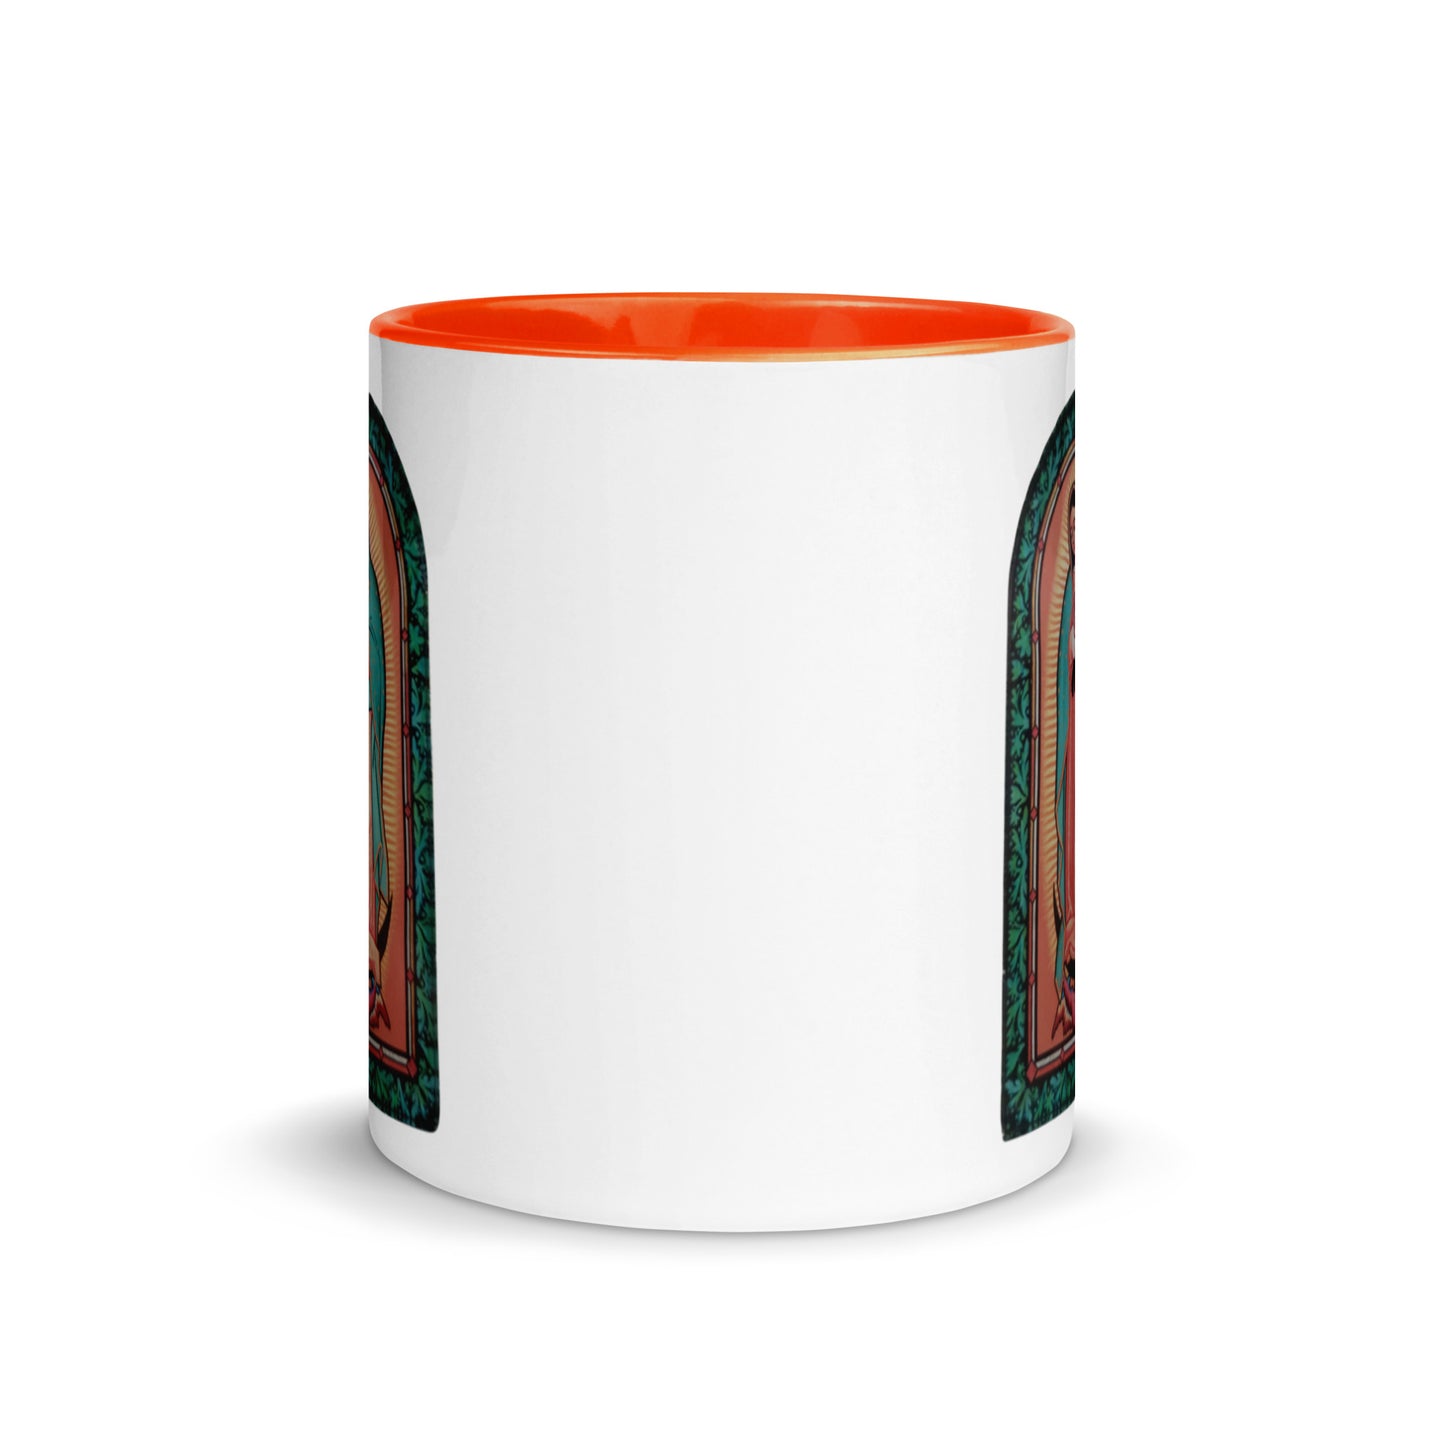 Our Lady of Guadalupe Mug with Color Inside